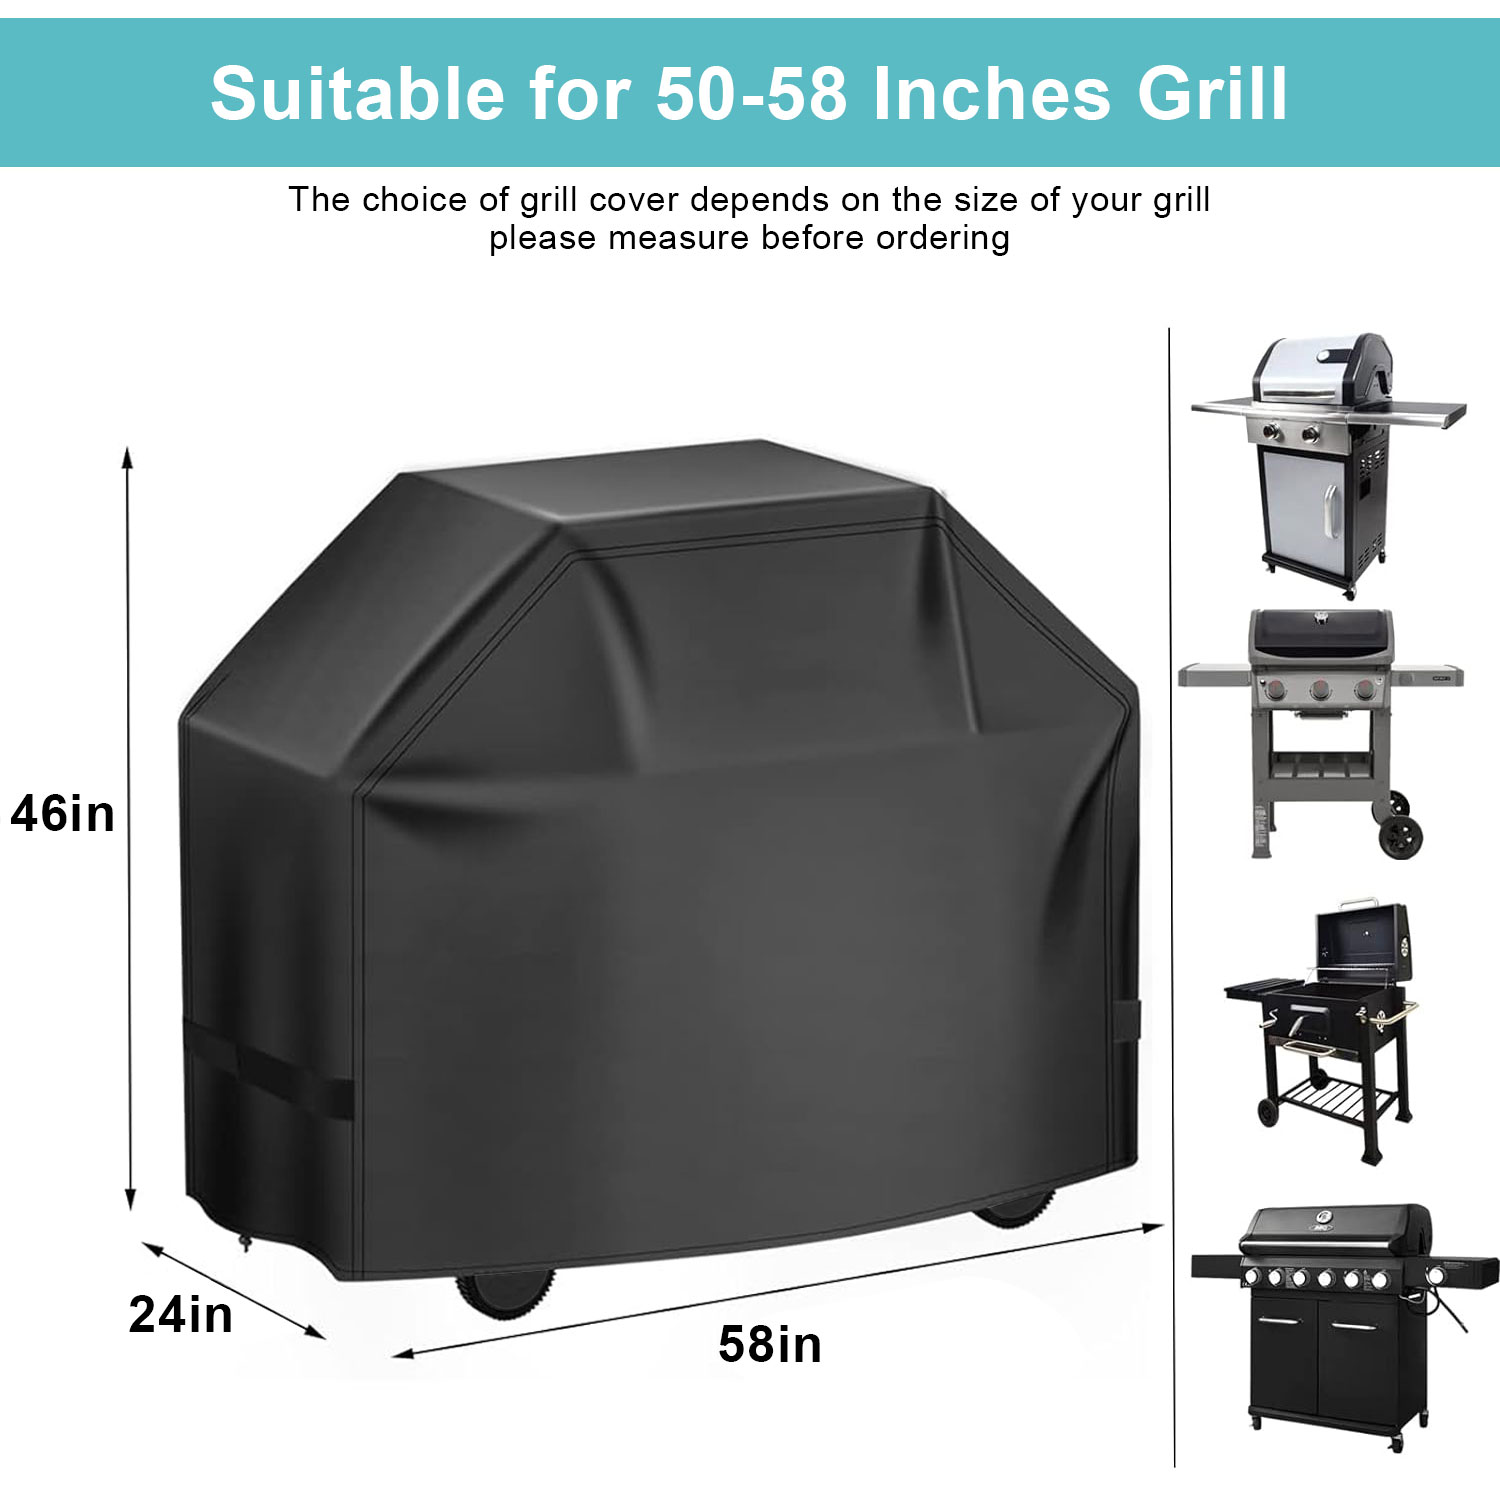 58 inch BBQ Gas Grill Cover, Waterproof, Rip-Proof, Weather & UV Resistant - image 5 of 7